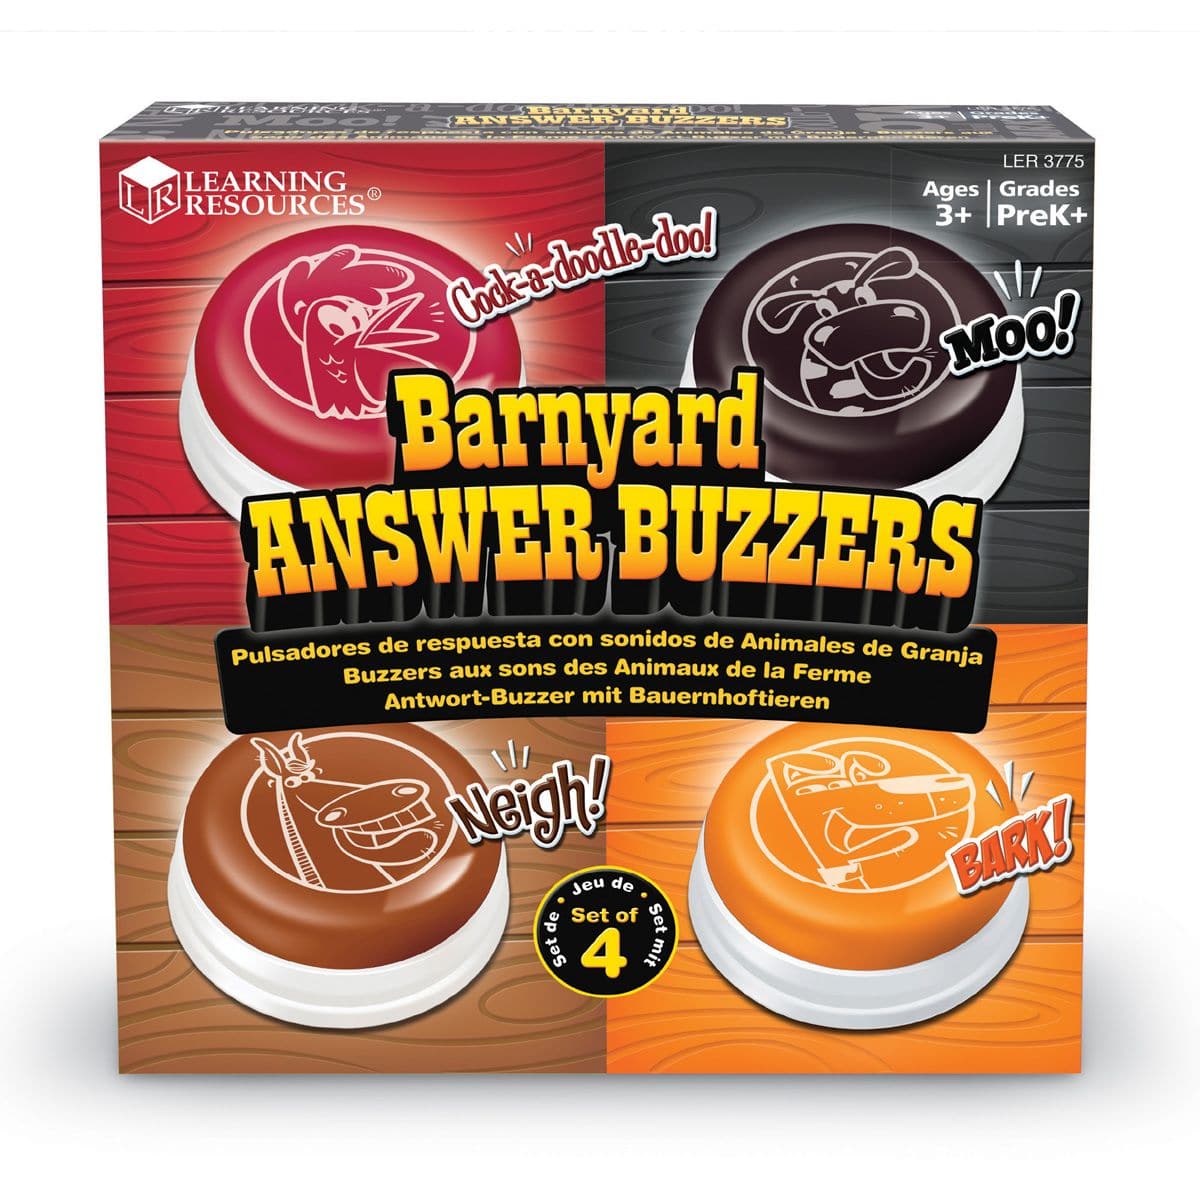 Learning Resources Barnyard Buzzers Set of 4, The Learning Resources Barnyard Buzzers set of four are easy to press different animal answer buzzers.The dog will bark, the cow will moo, the horse will neigh and the hen will cock-a-doodle-doo.Respond to any question with your favourite animal sound to liven up any game. Get little ones giggling and imitating these silly sounds Add them to any family board game for extra fun Offers lightheartedness for any classroom games or activities Includes: 4 Buzzers, Lea